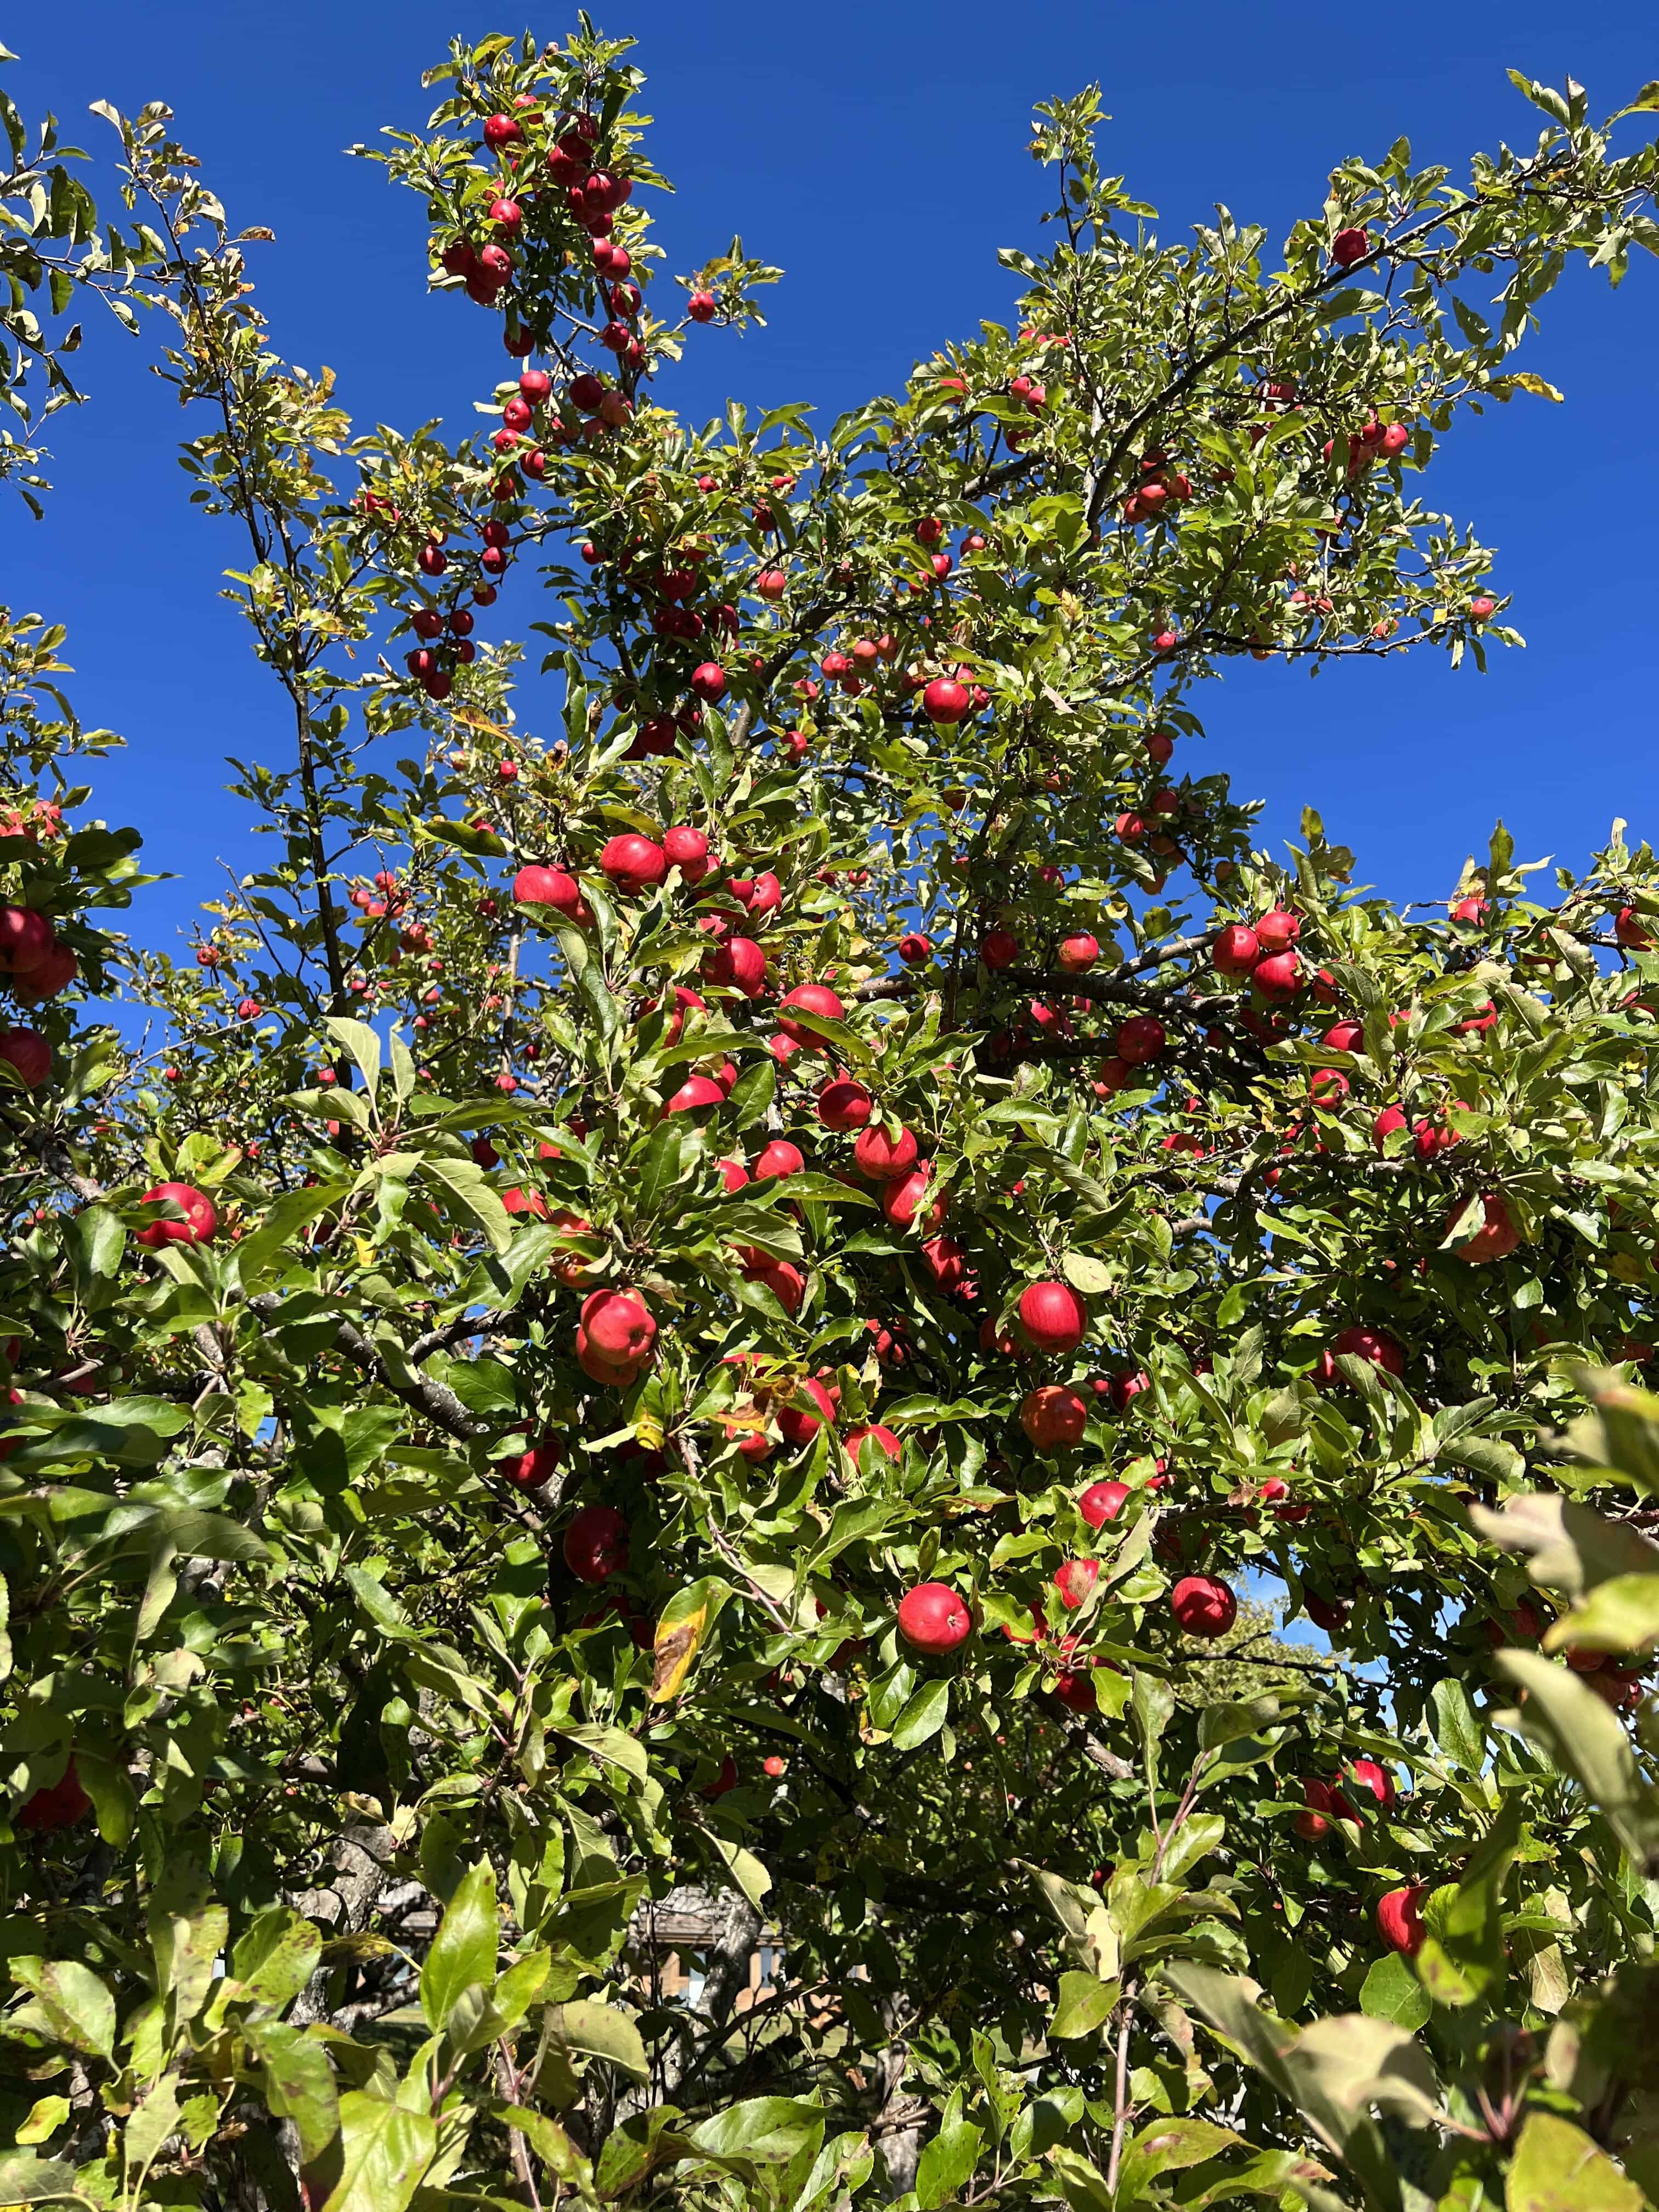 a bright blue sky on a sunny day provides the backdrop for the branches of an apple tree boasting full, red apples